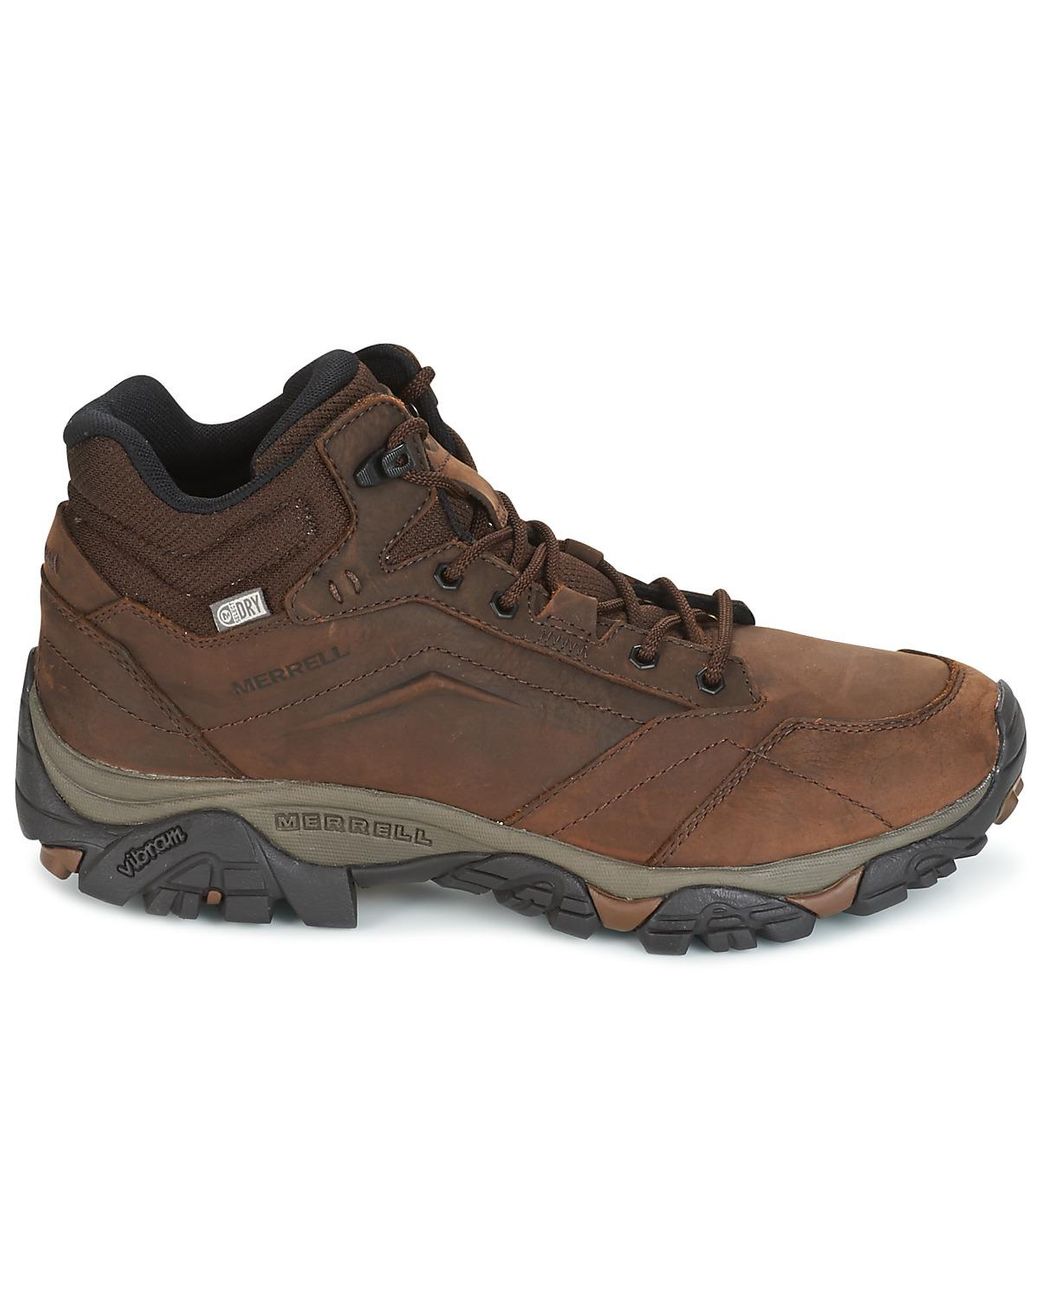 Merrell Leather Moab Venture Mid Wtpf Walking Boots in Brown for Men - Save  21% - Lyst